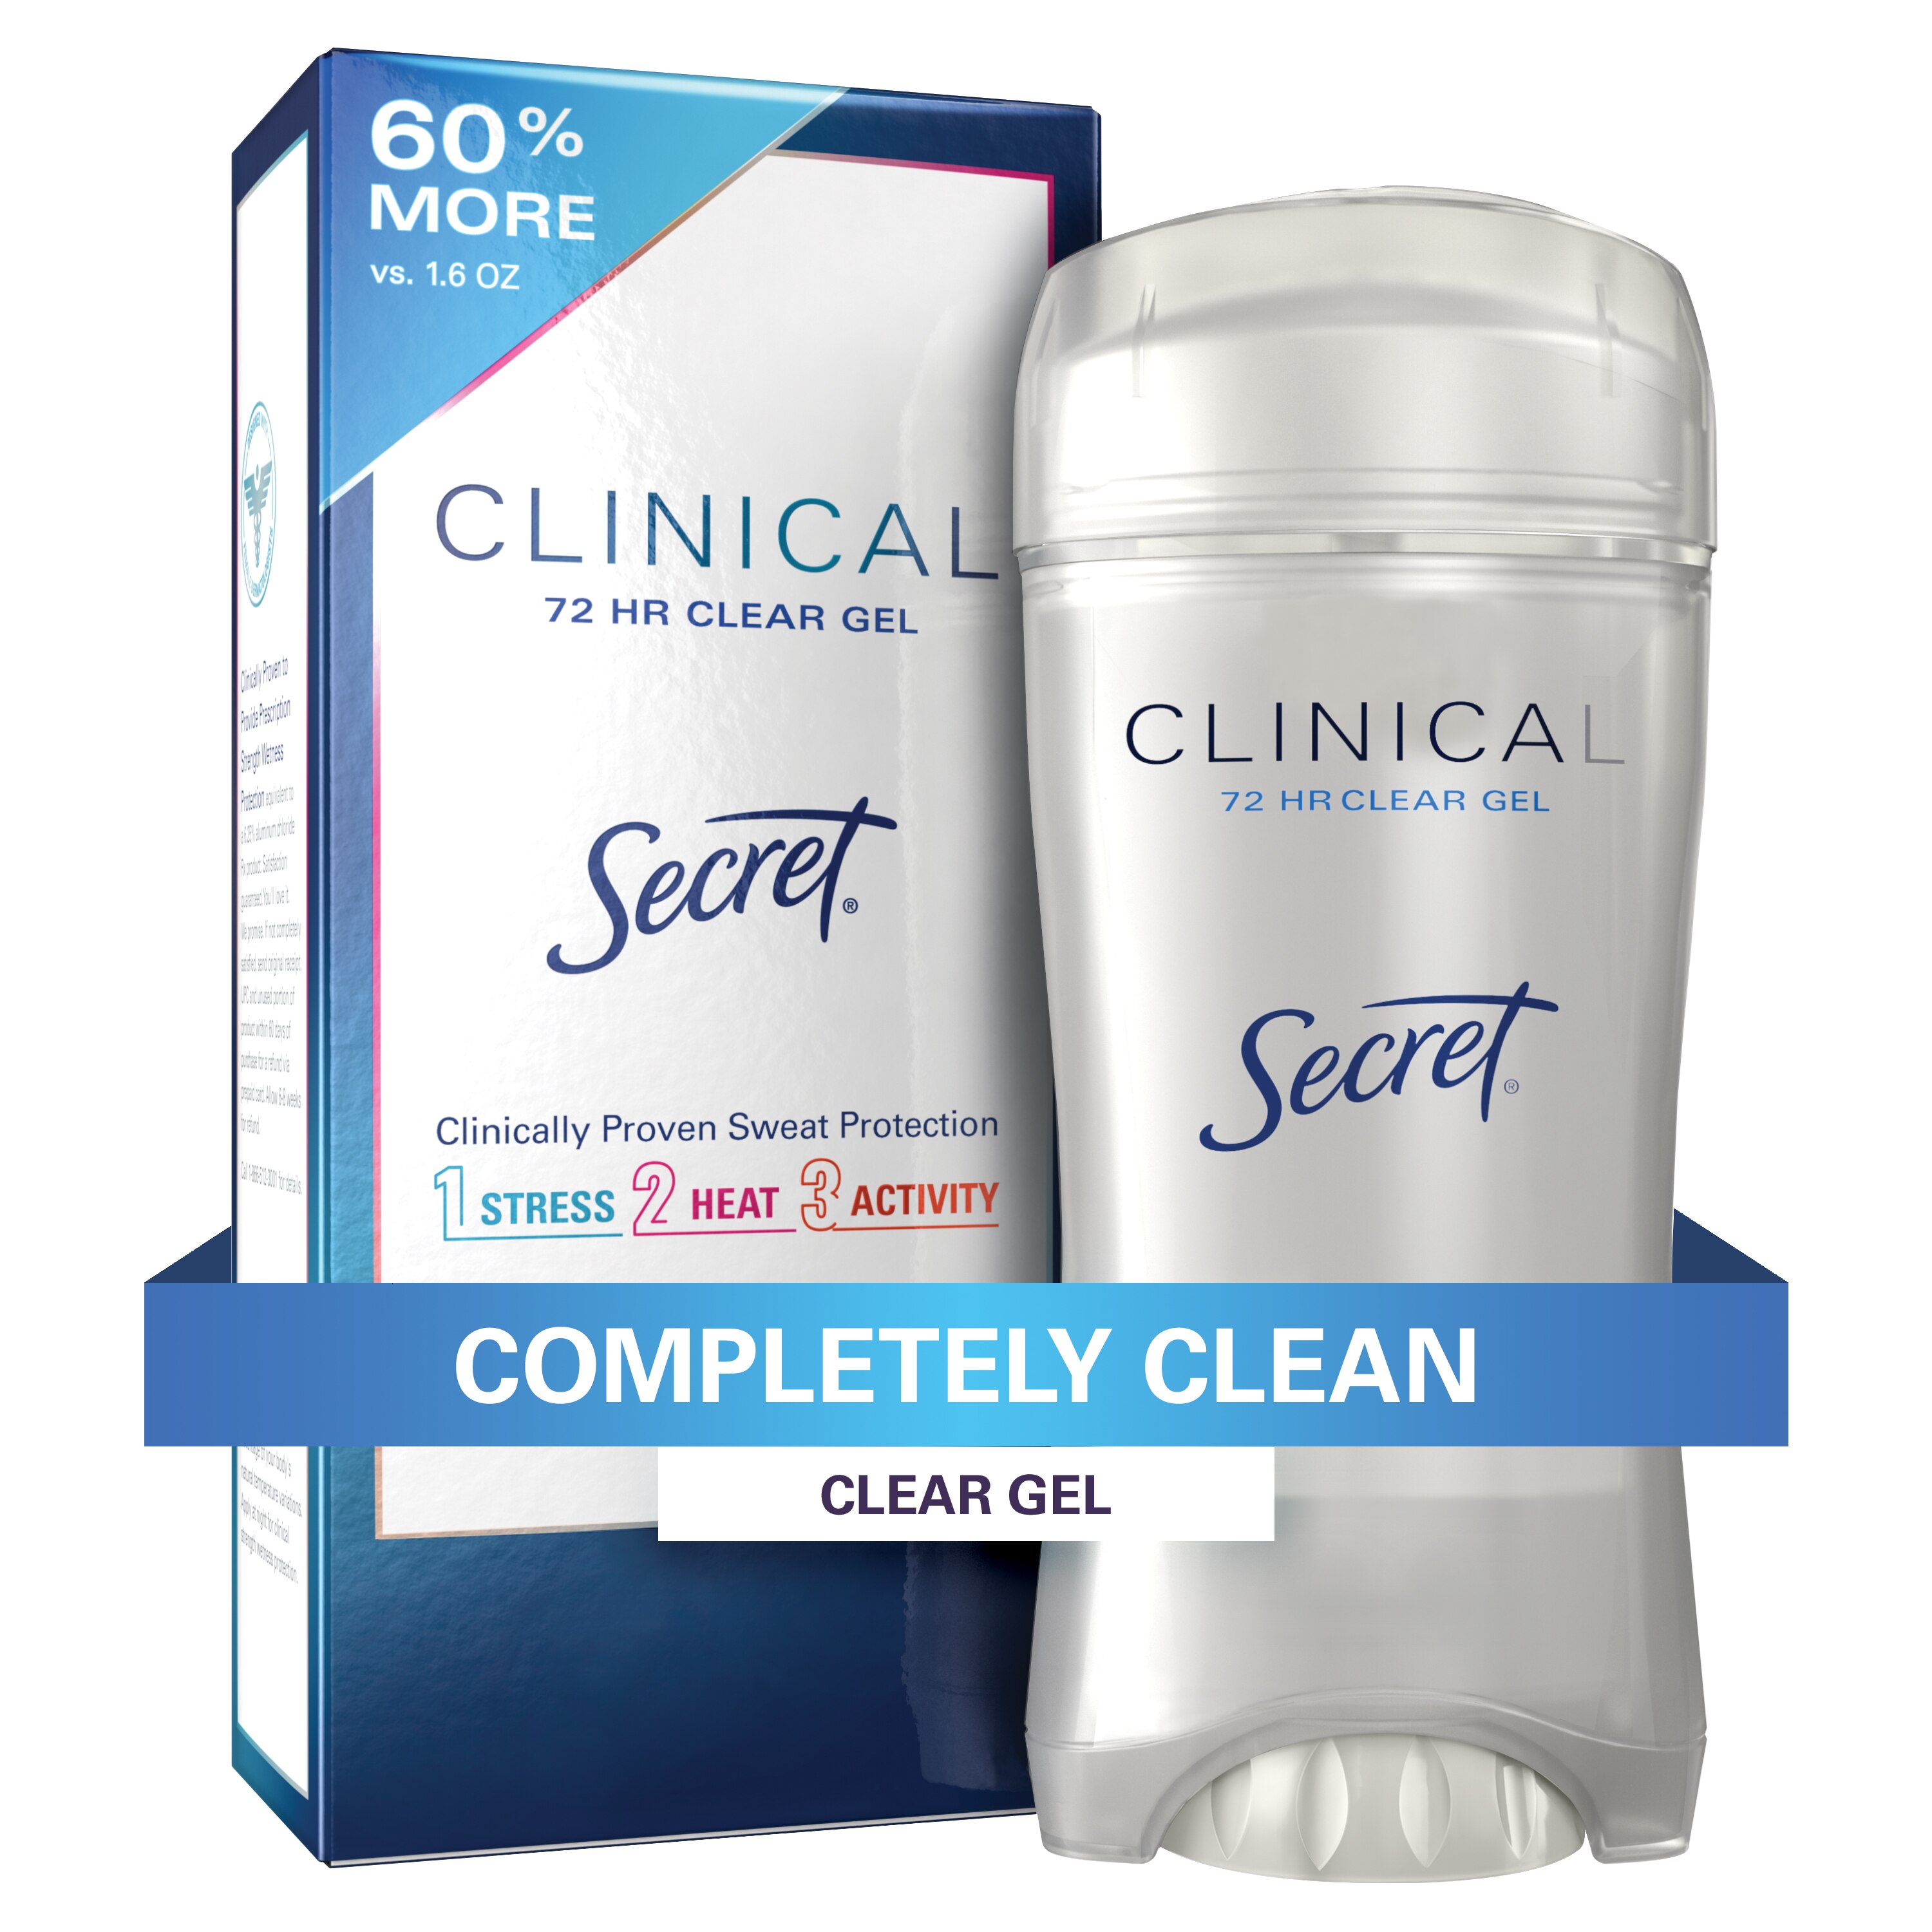 Secret Clinical Strength Clear Gel Completely Clean Scent Women's Antiperspirant & Deodorant, 2.6 OZ